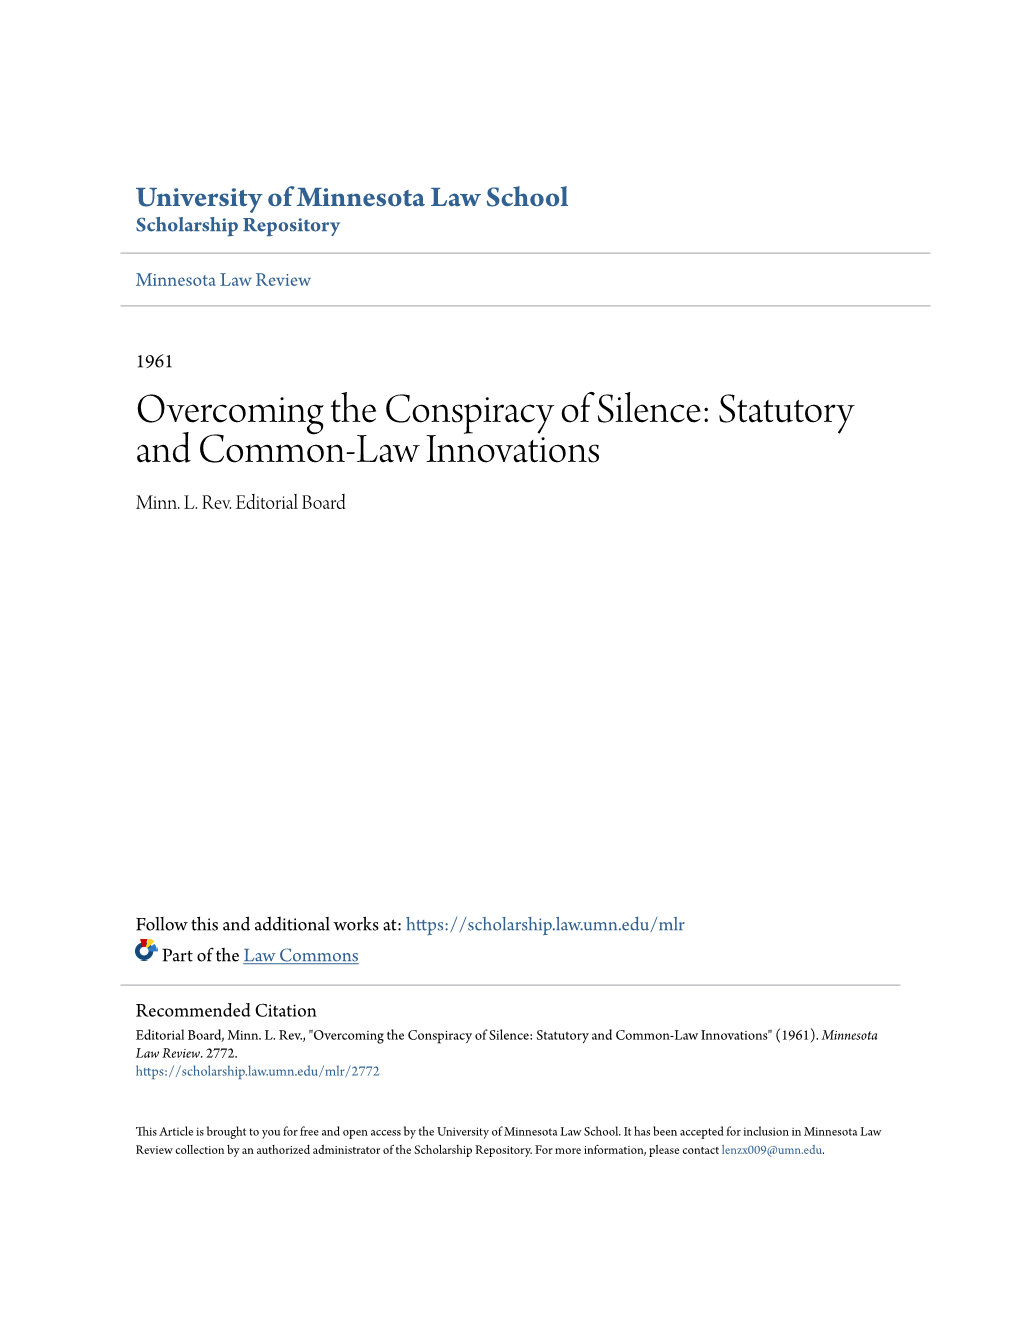 Overcoming the Conspiracy of Silence: Statutory and Common-Law Innovations Minn